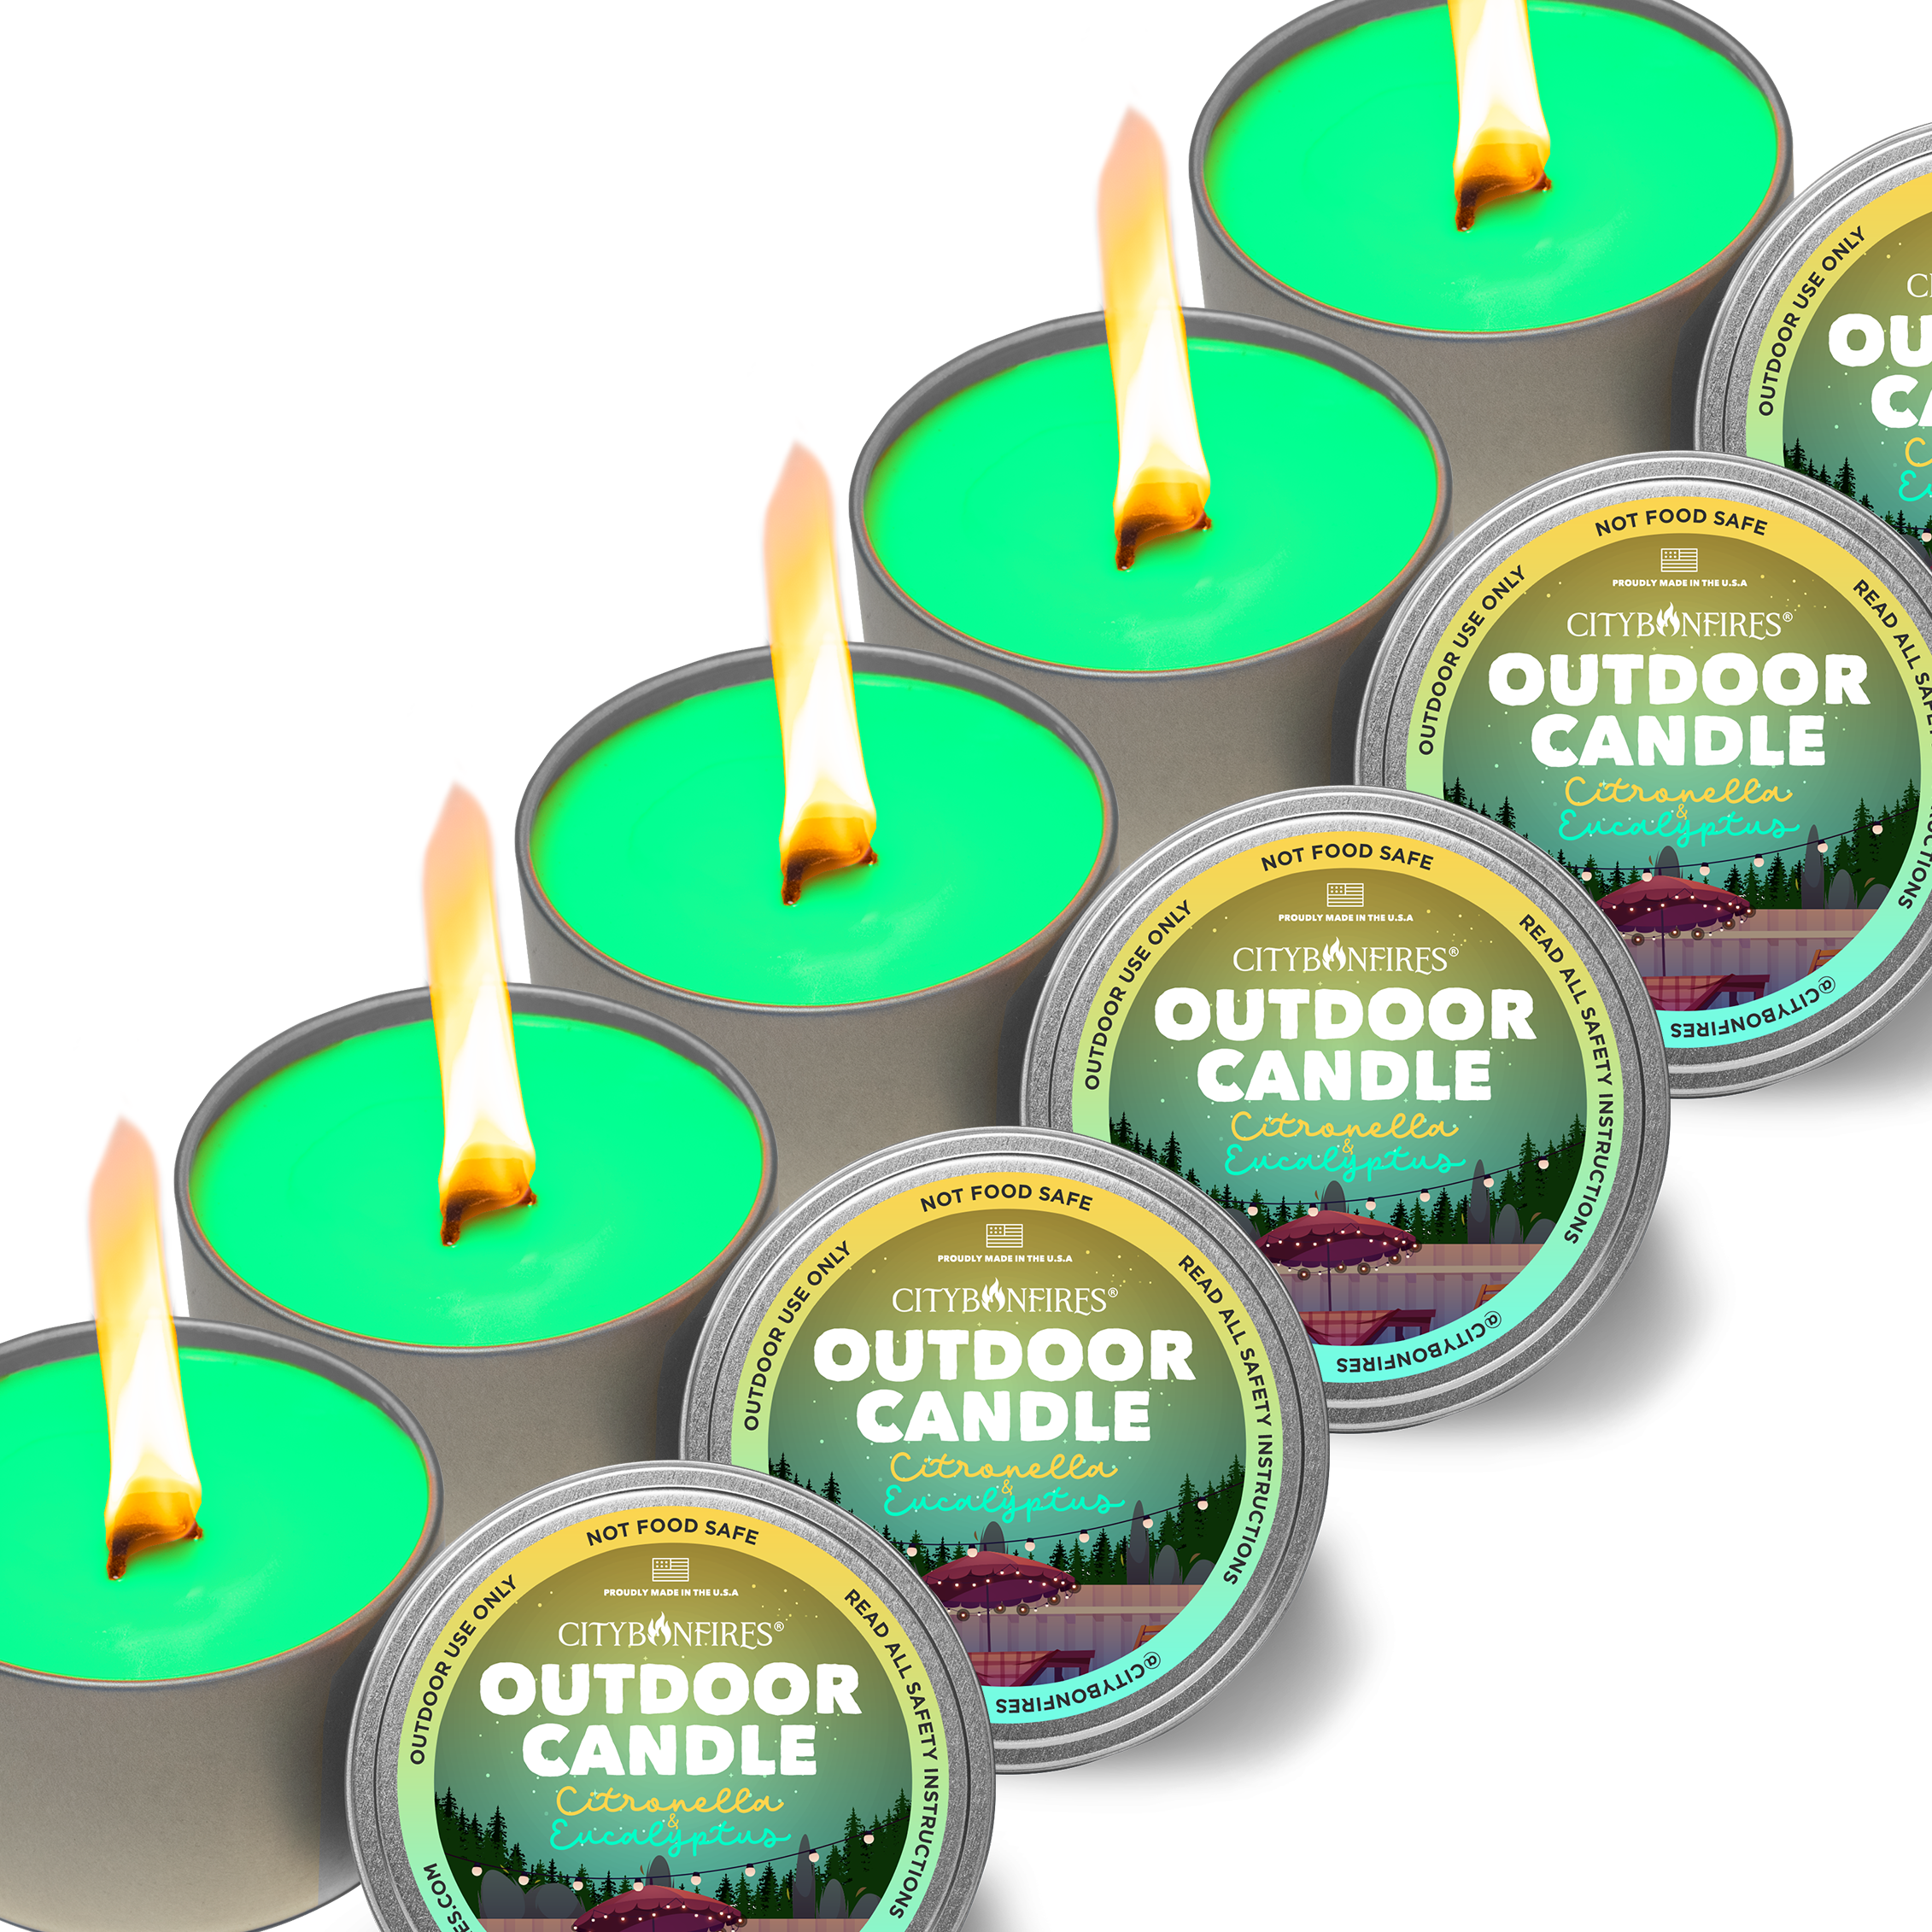 The Outdoor Candle - Citronella and Eucalyptus